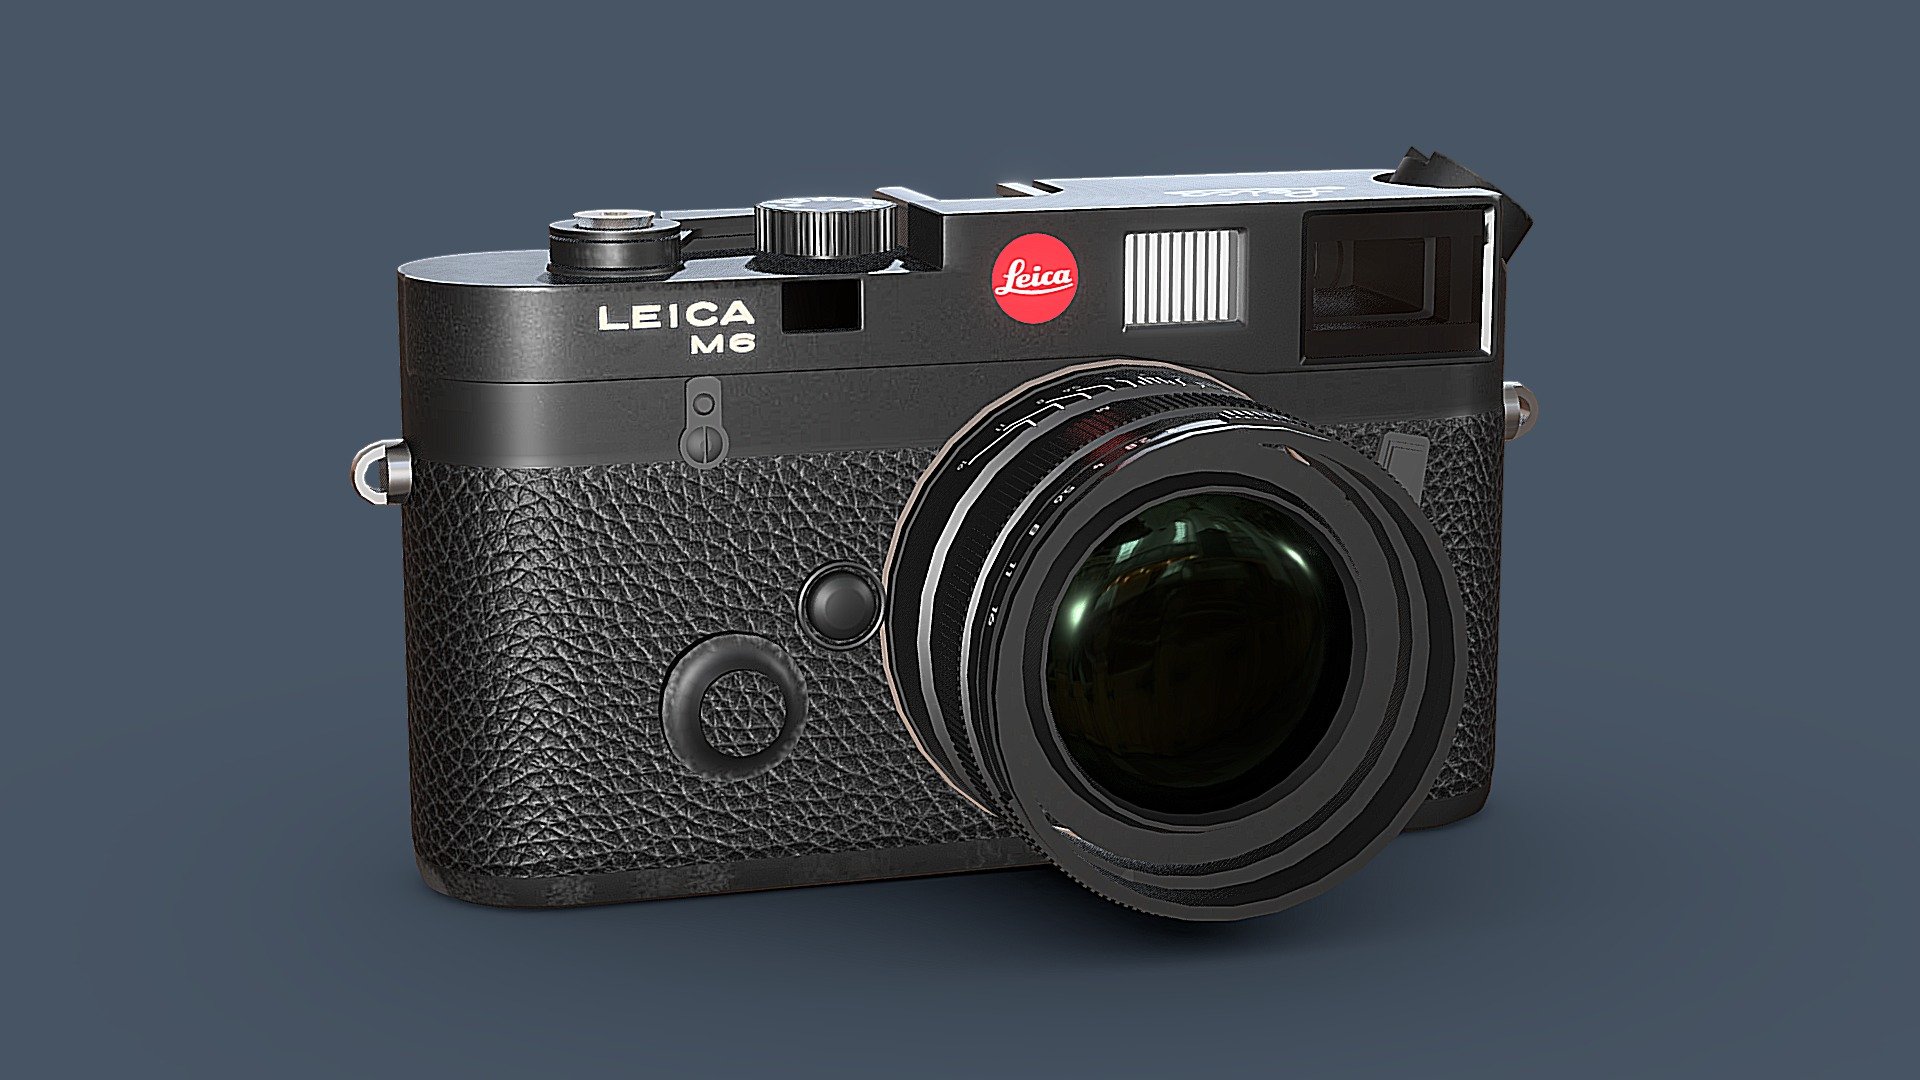 A leica m6 with a Summicron 35mm f2 M mount
The camera presents some surface imperfections-
Technical info:

-28279 quads, with a total of 56674 triangles (Not reccomended for game-ready asset)
The body presents 4k textures with some 2k maps
They are 16 objects (not sure if sketchfab joins the objects later)

Huge thanks to Free3dTextureHD for the leather texture

All Textures are free for personal and commercial use.
You are not allowed to sell the images alone or in packs.
You are allowed to distribute them only if it’s included in your project
(3d work , architecture , video games , web design, Photoshop art, wallpaper , background, graphic design ,videos, print …).
You do not need to give a credit or attribution when you use them.
You may not sell or claim ownership of these textures. **My patreon if you want to donate and support me (you will also get exclusive assets): https://www.patreon.com/user?u=82064625&amp;fan_landing=true&amp;view_as=public      ** - Leica M6 - Download Free 3D model by Kenkento3D (@kenkento.zapater) 3d model